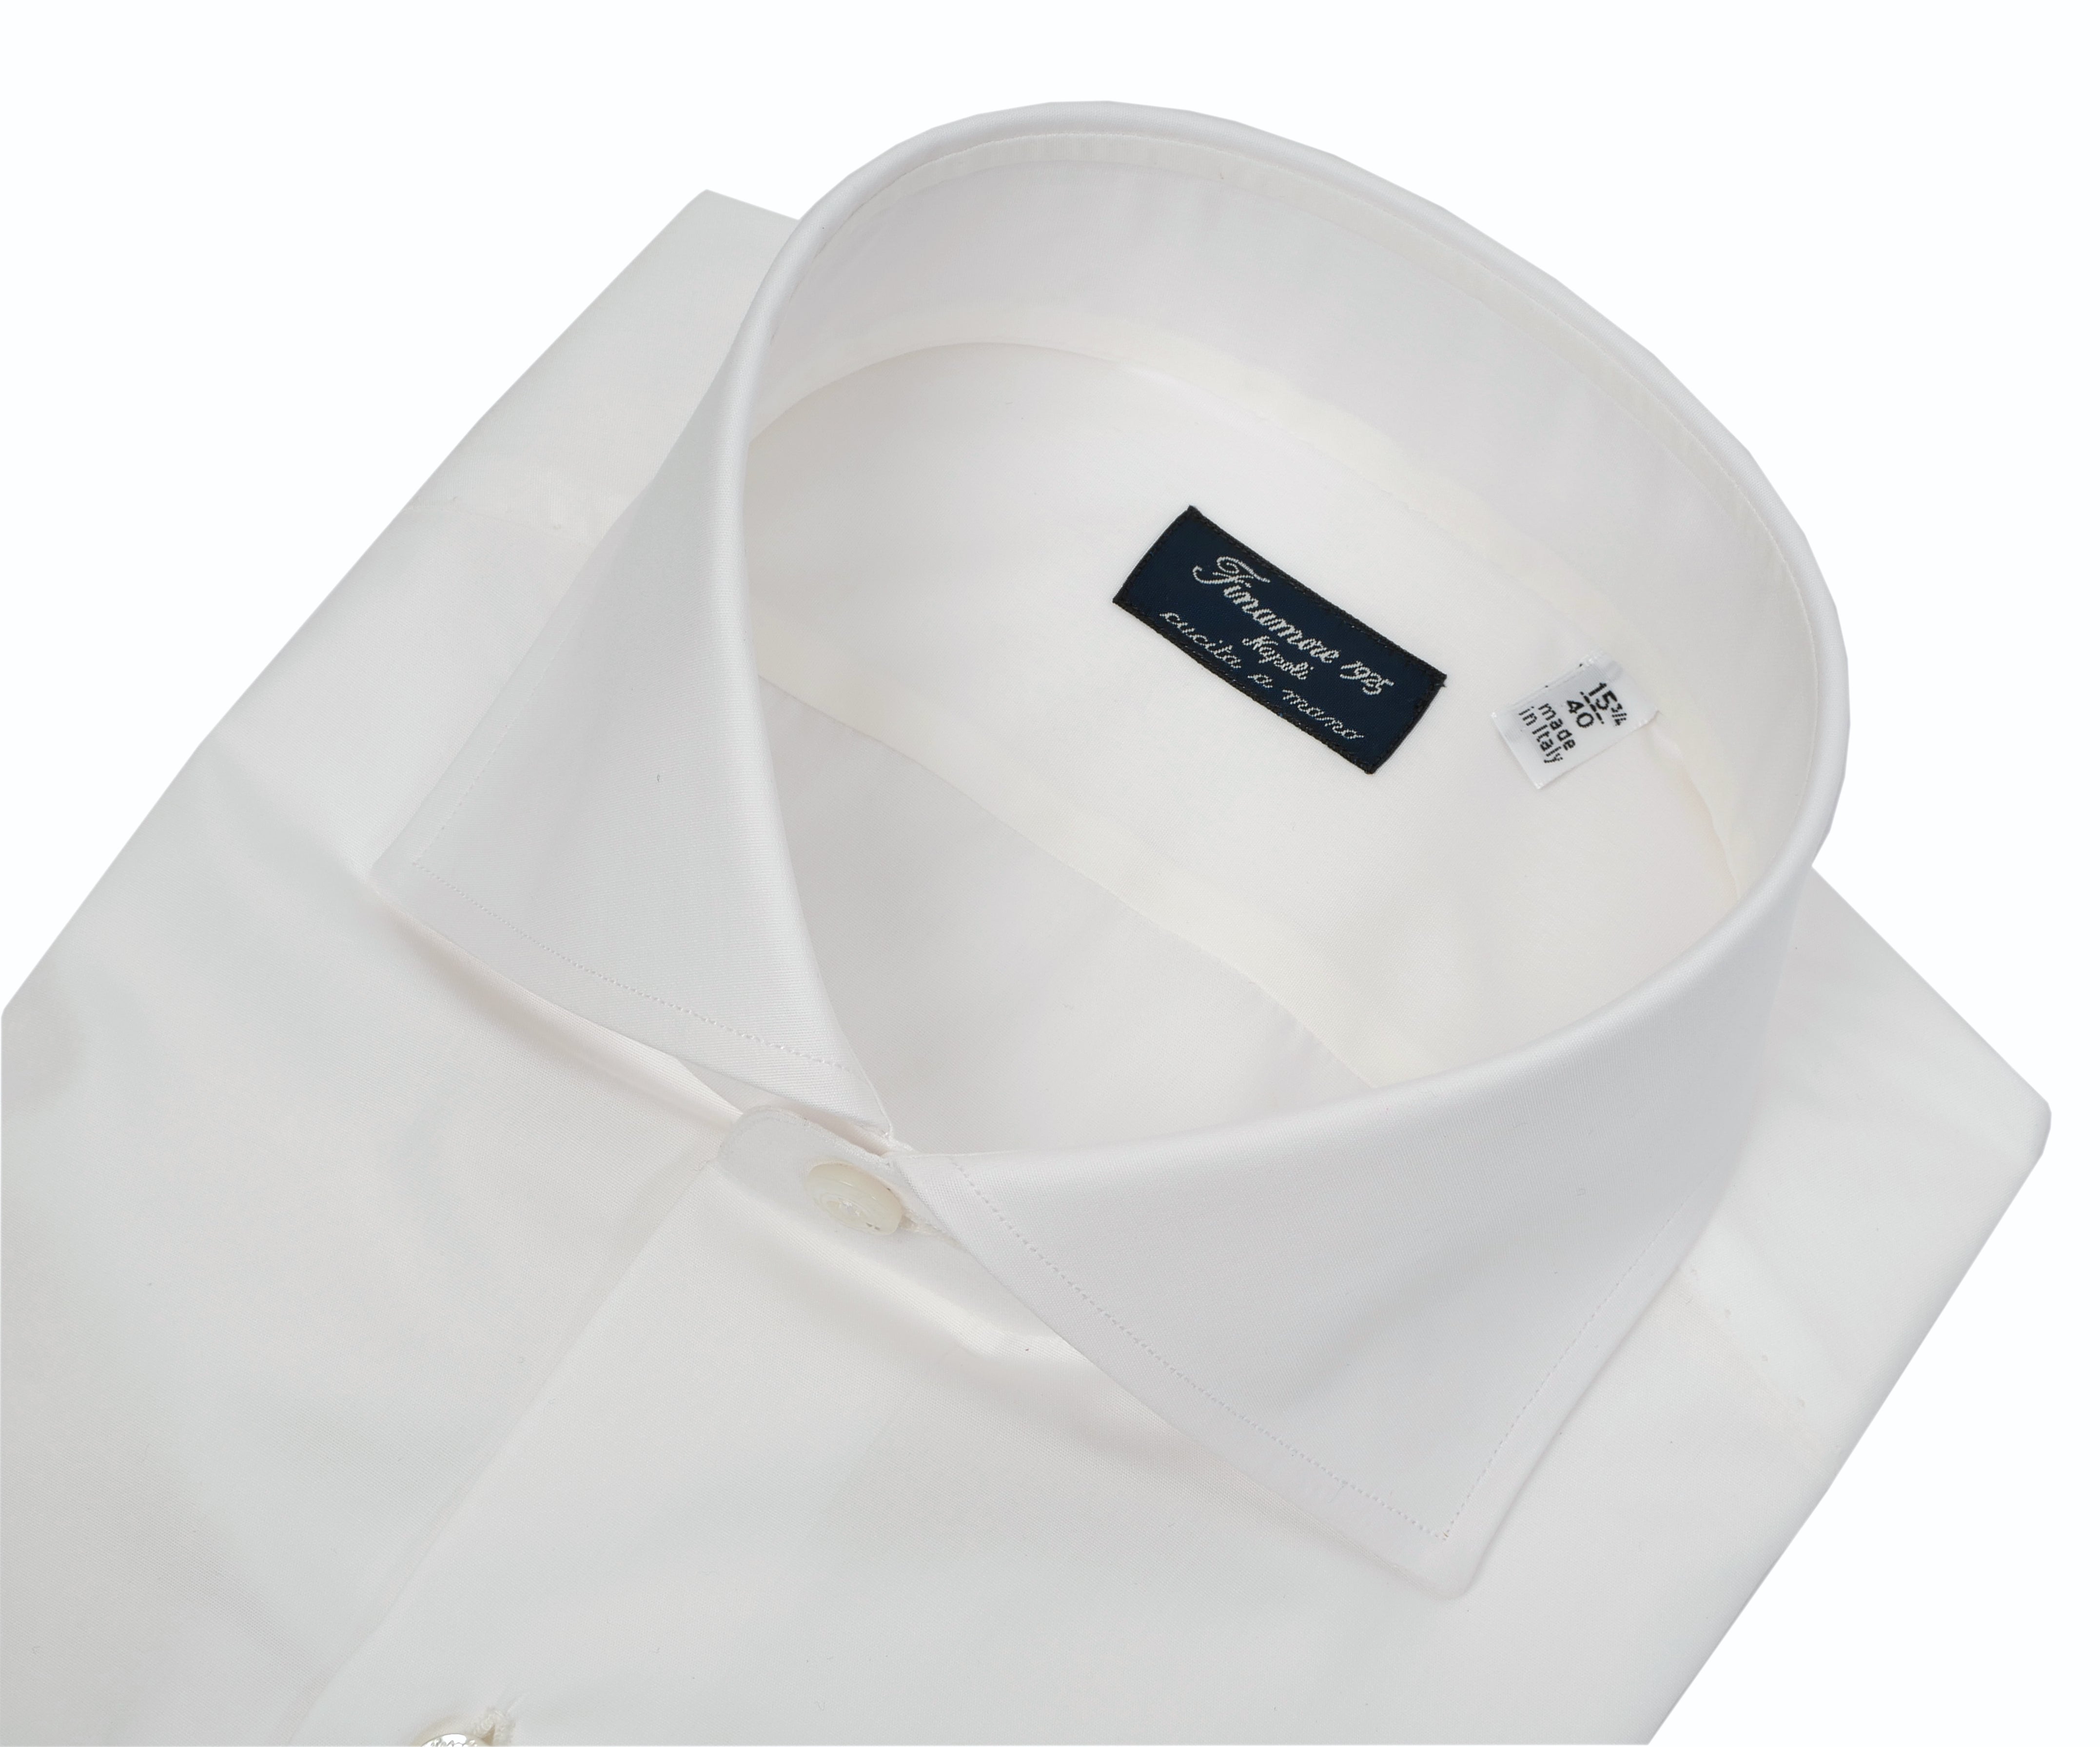 Tailored shirt in double twisted poplin cotton with twin cuffs, Naples line